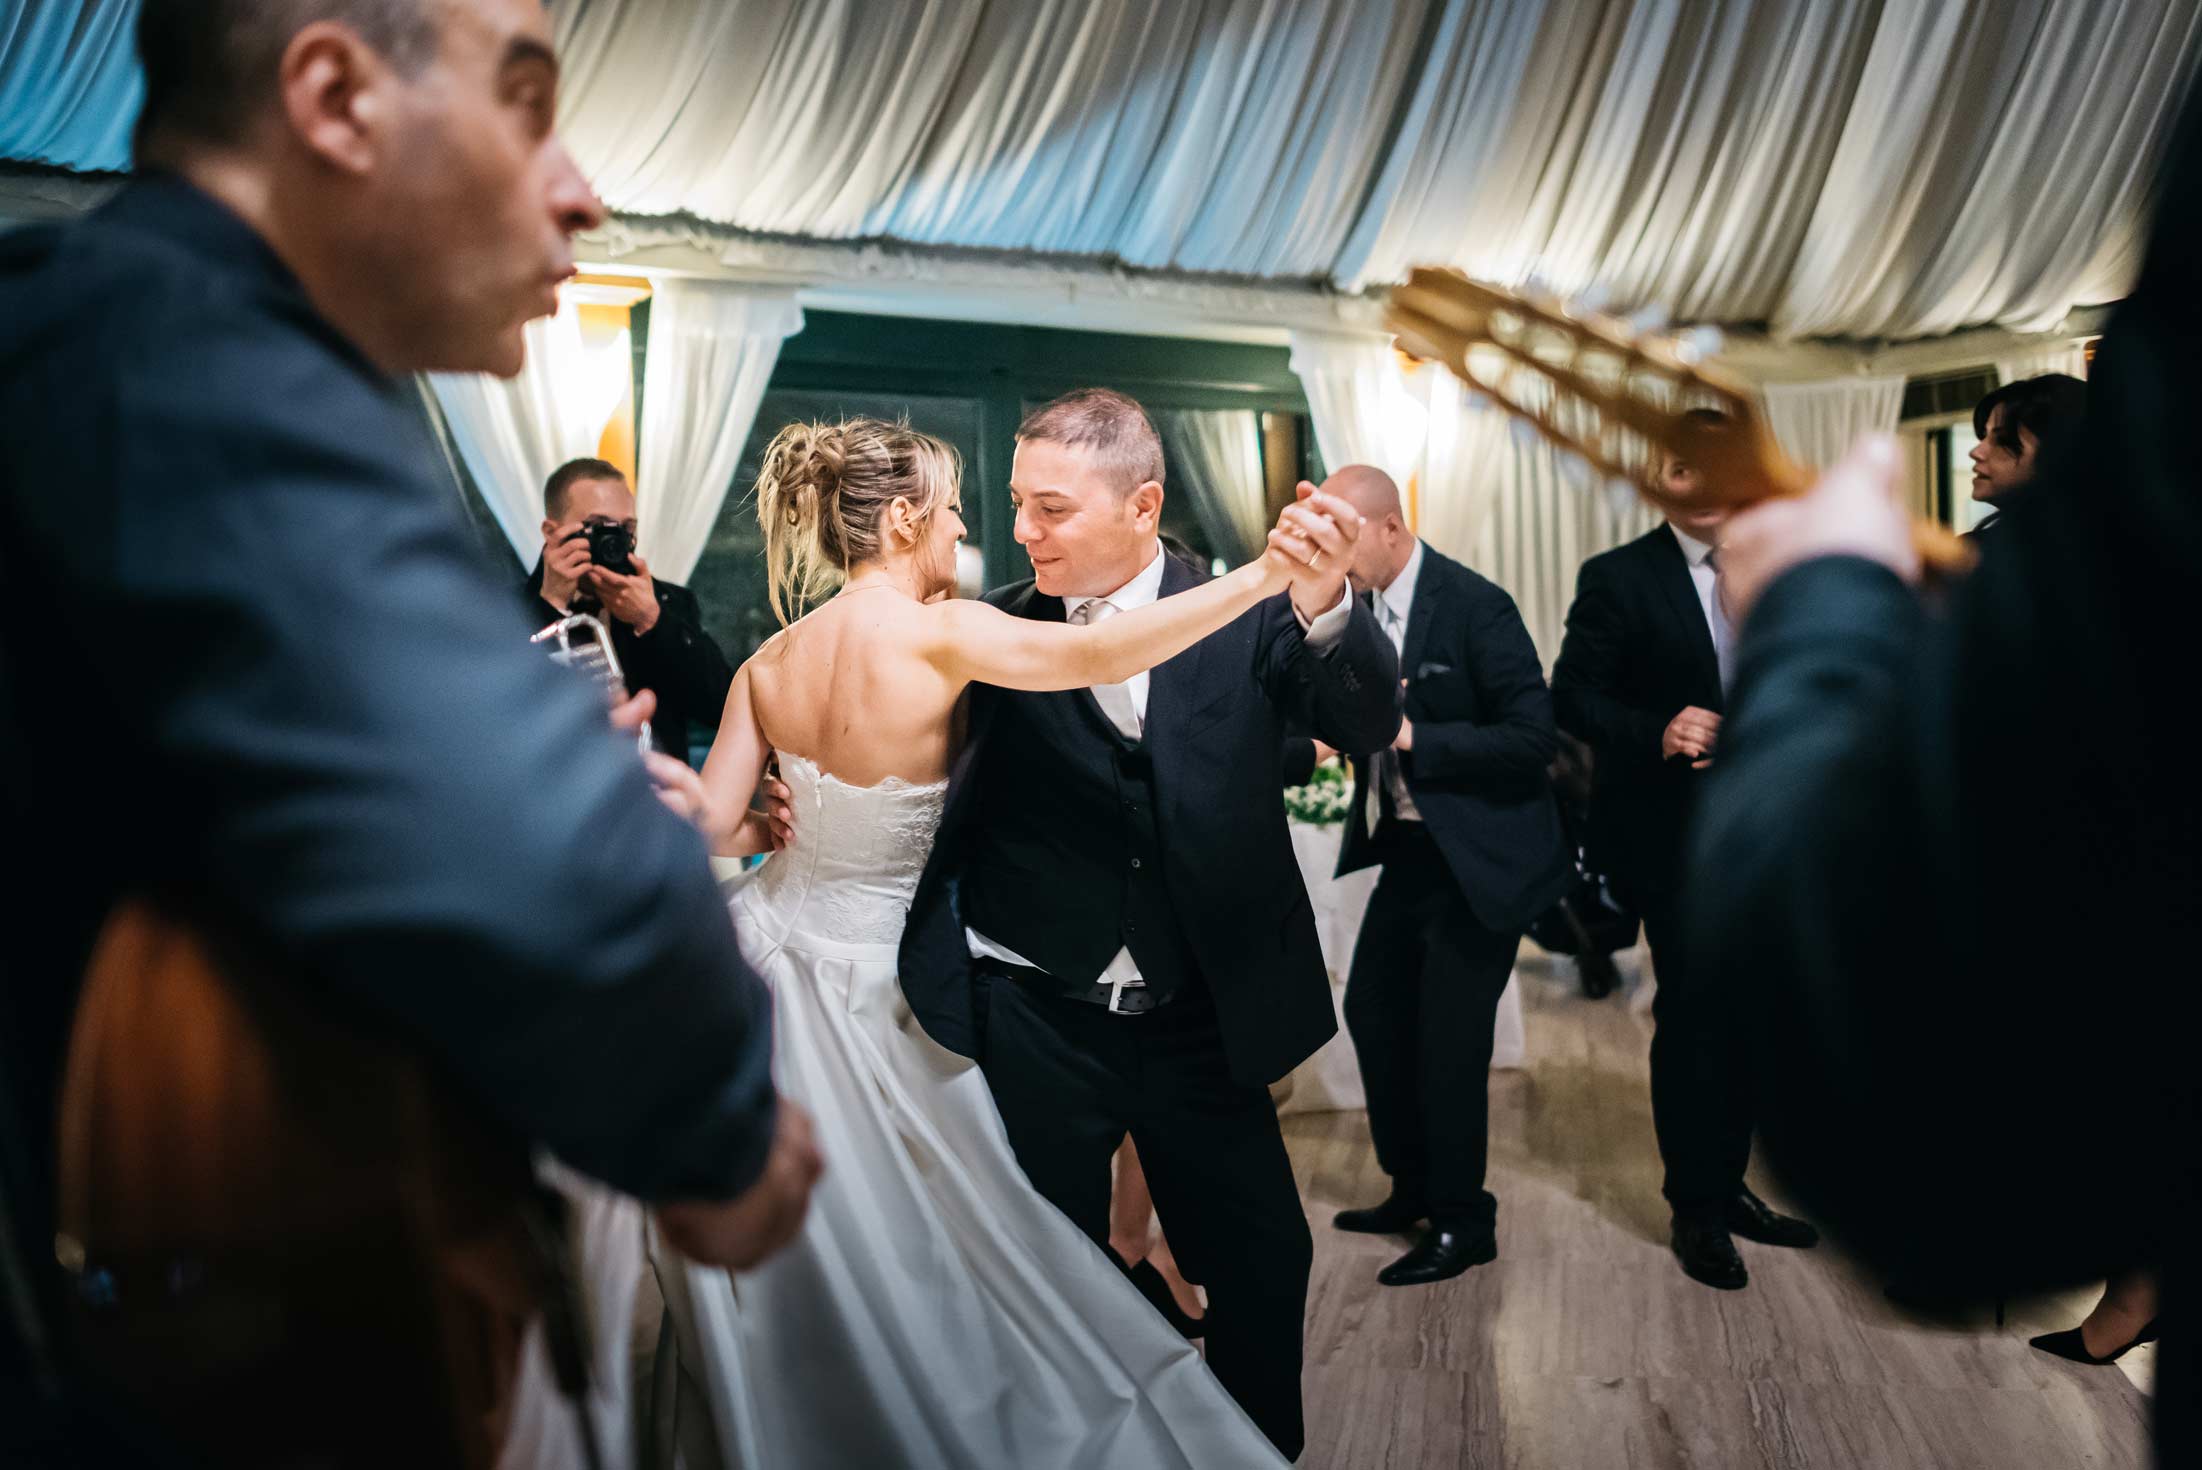 Newlyweds dancing during a wedding in Italy